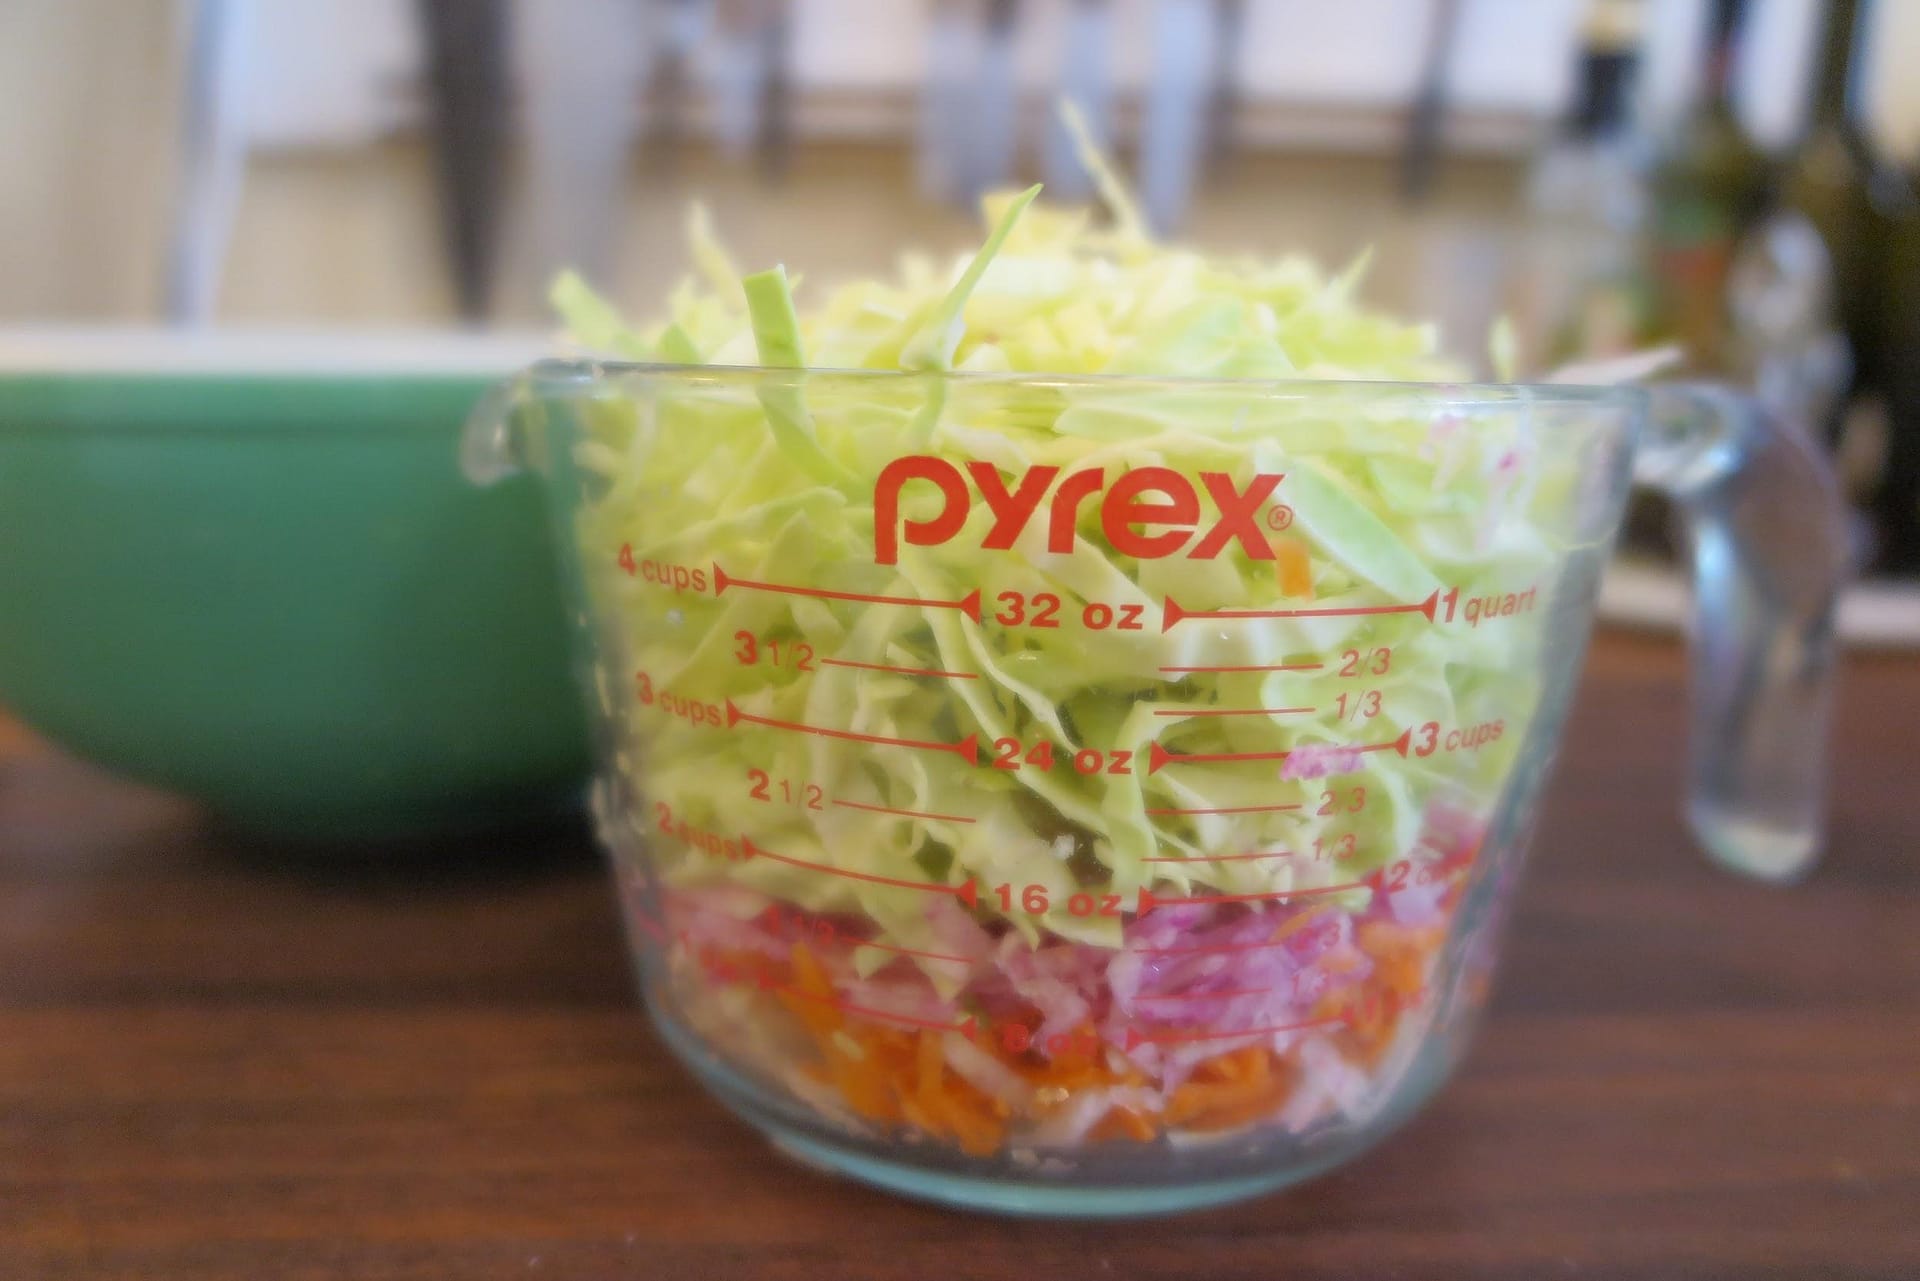 A large glass Pyrex measuring cup filled with shredded cabbage, radishes, and carrots